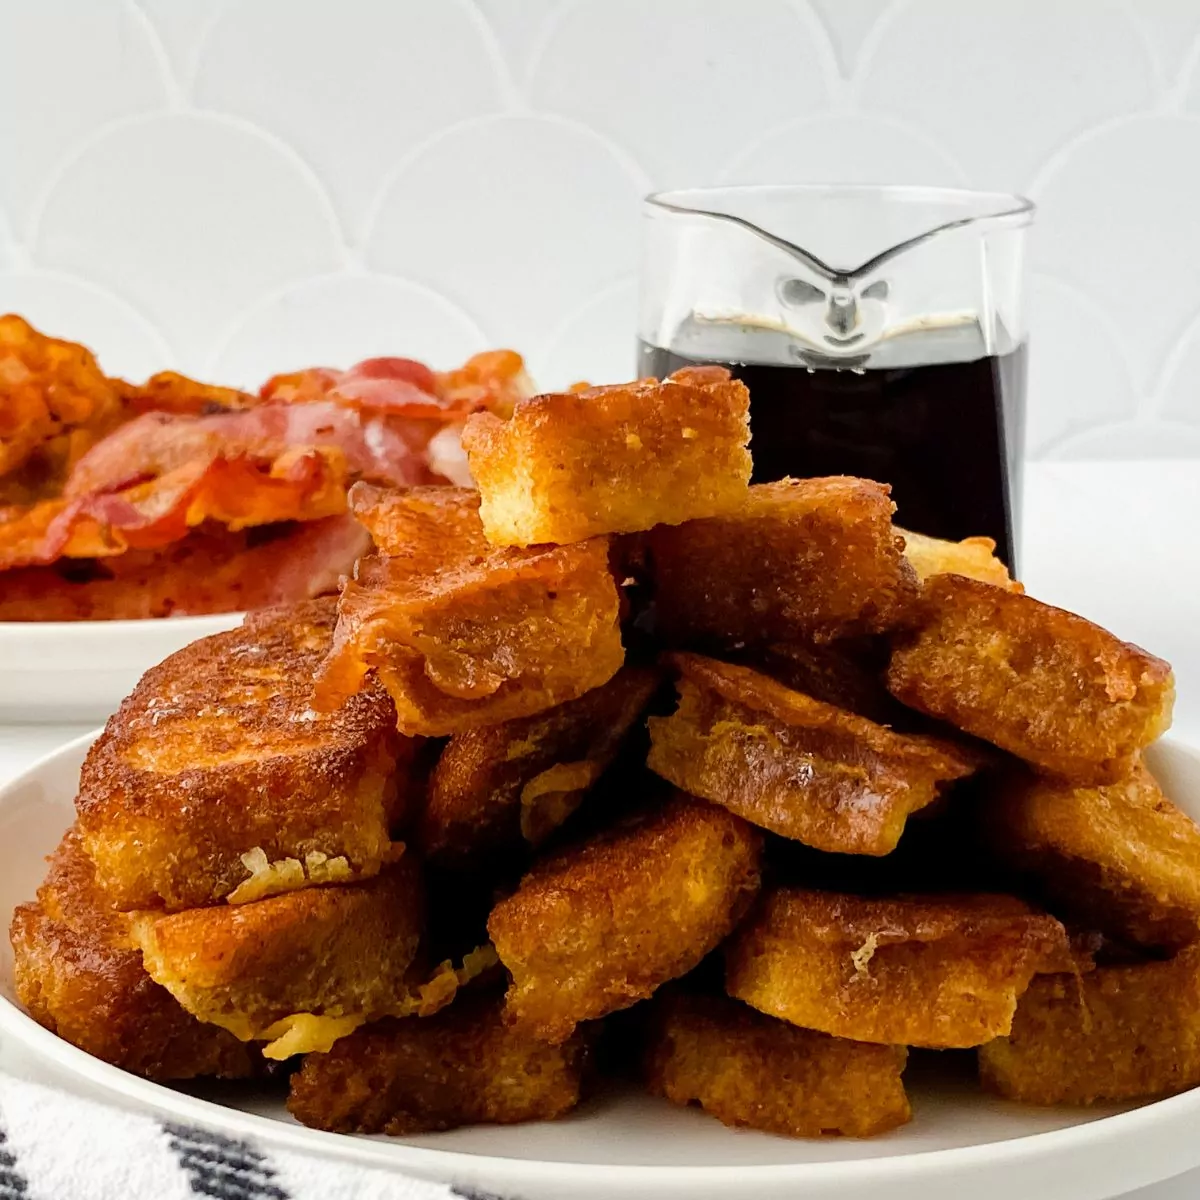 French toast served with bacon and warm syrup.